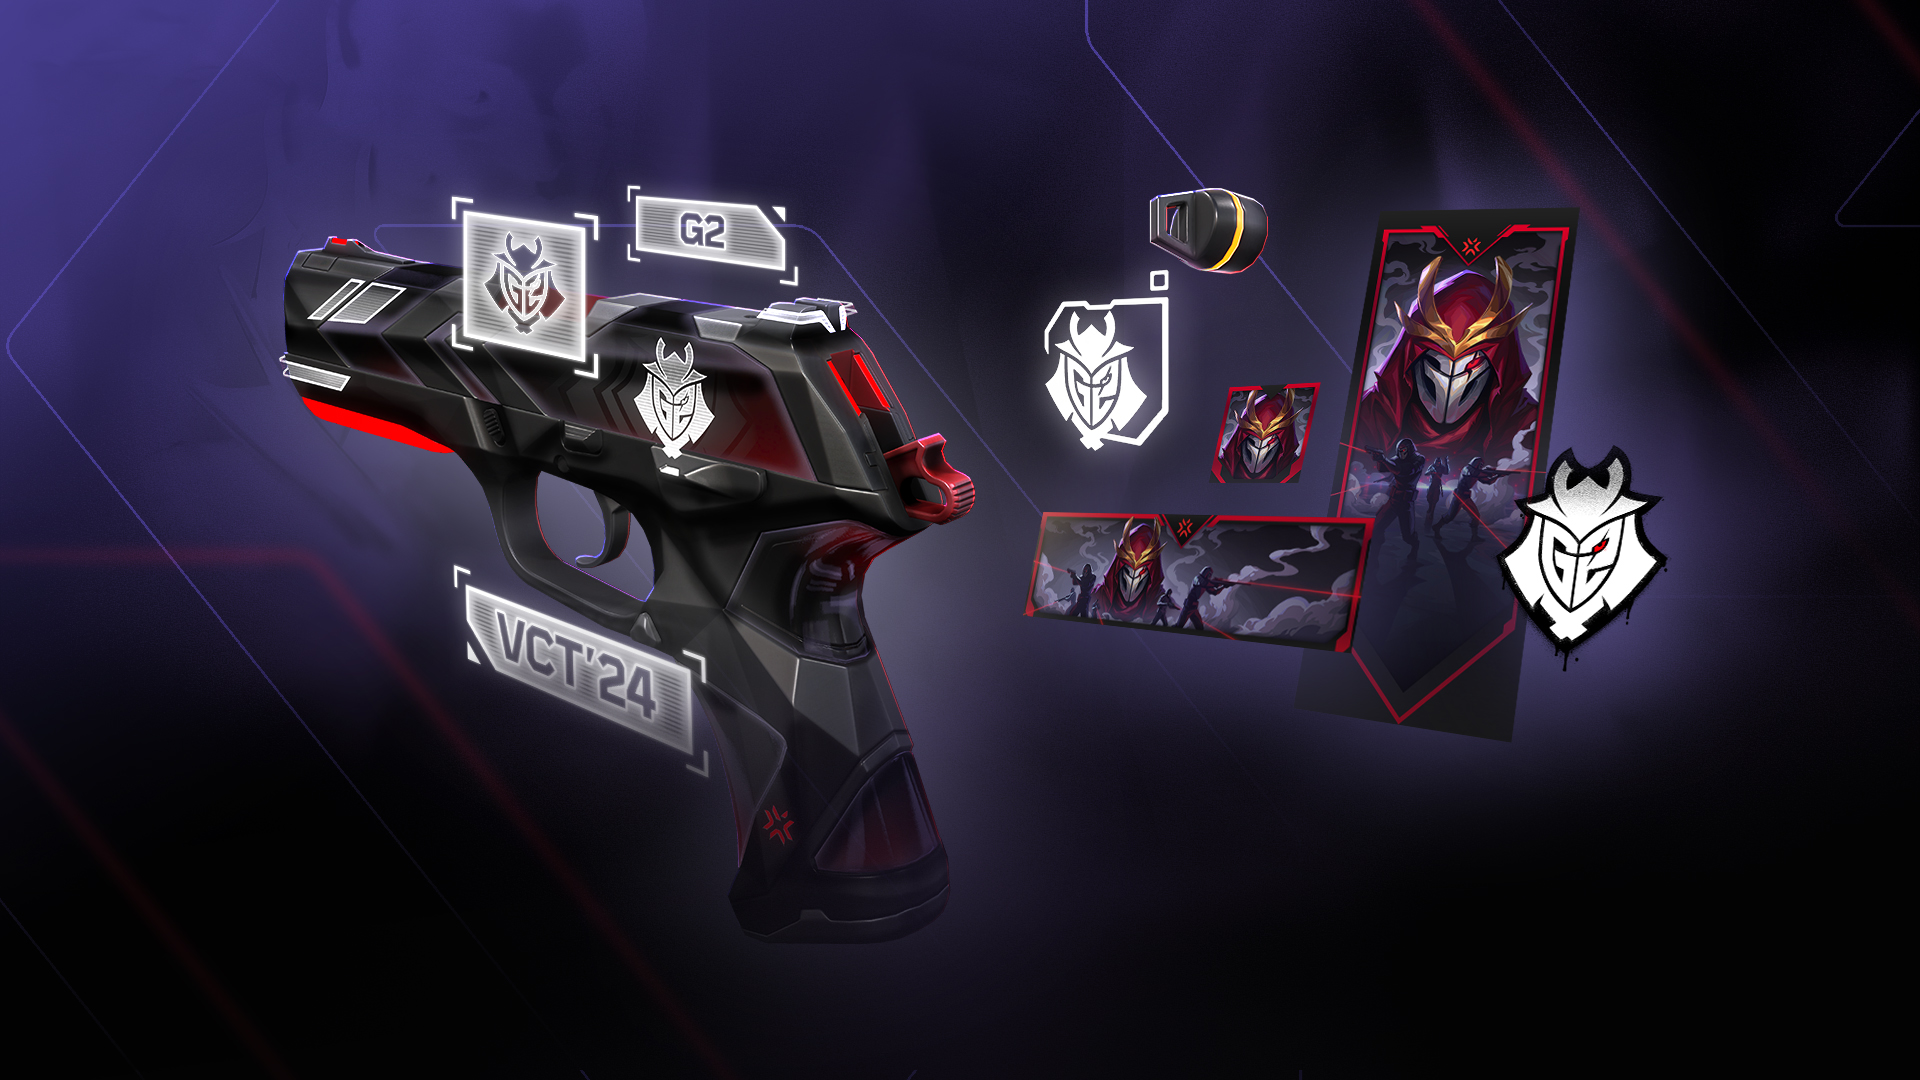 G2 Esports VCT Team Capsule. (Image Credits: Riot Games)